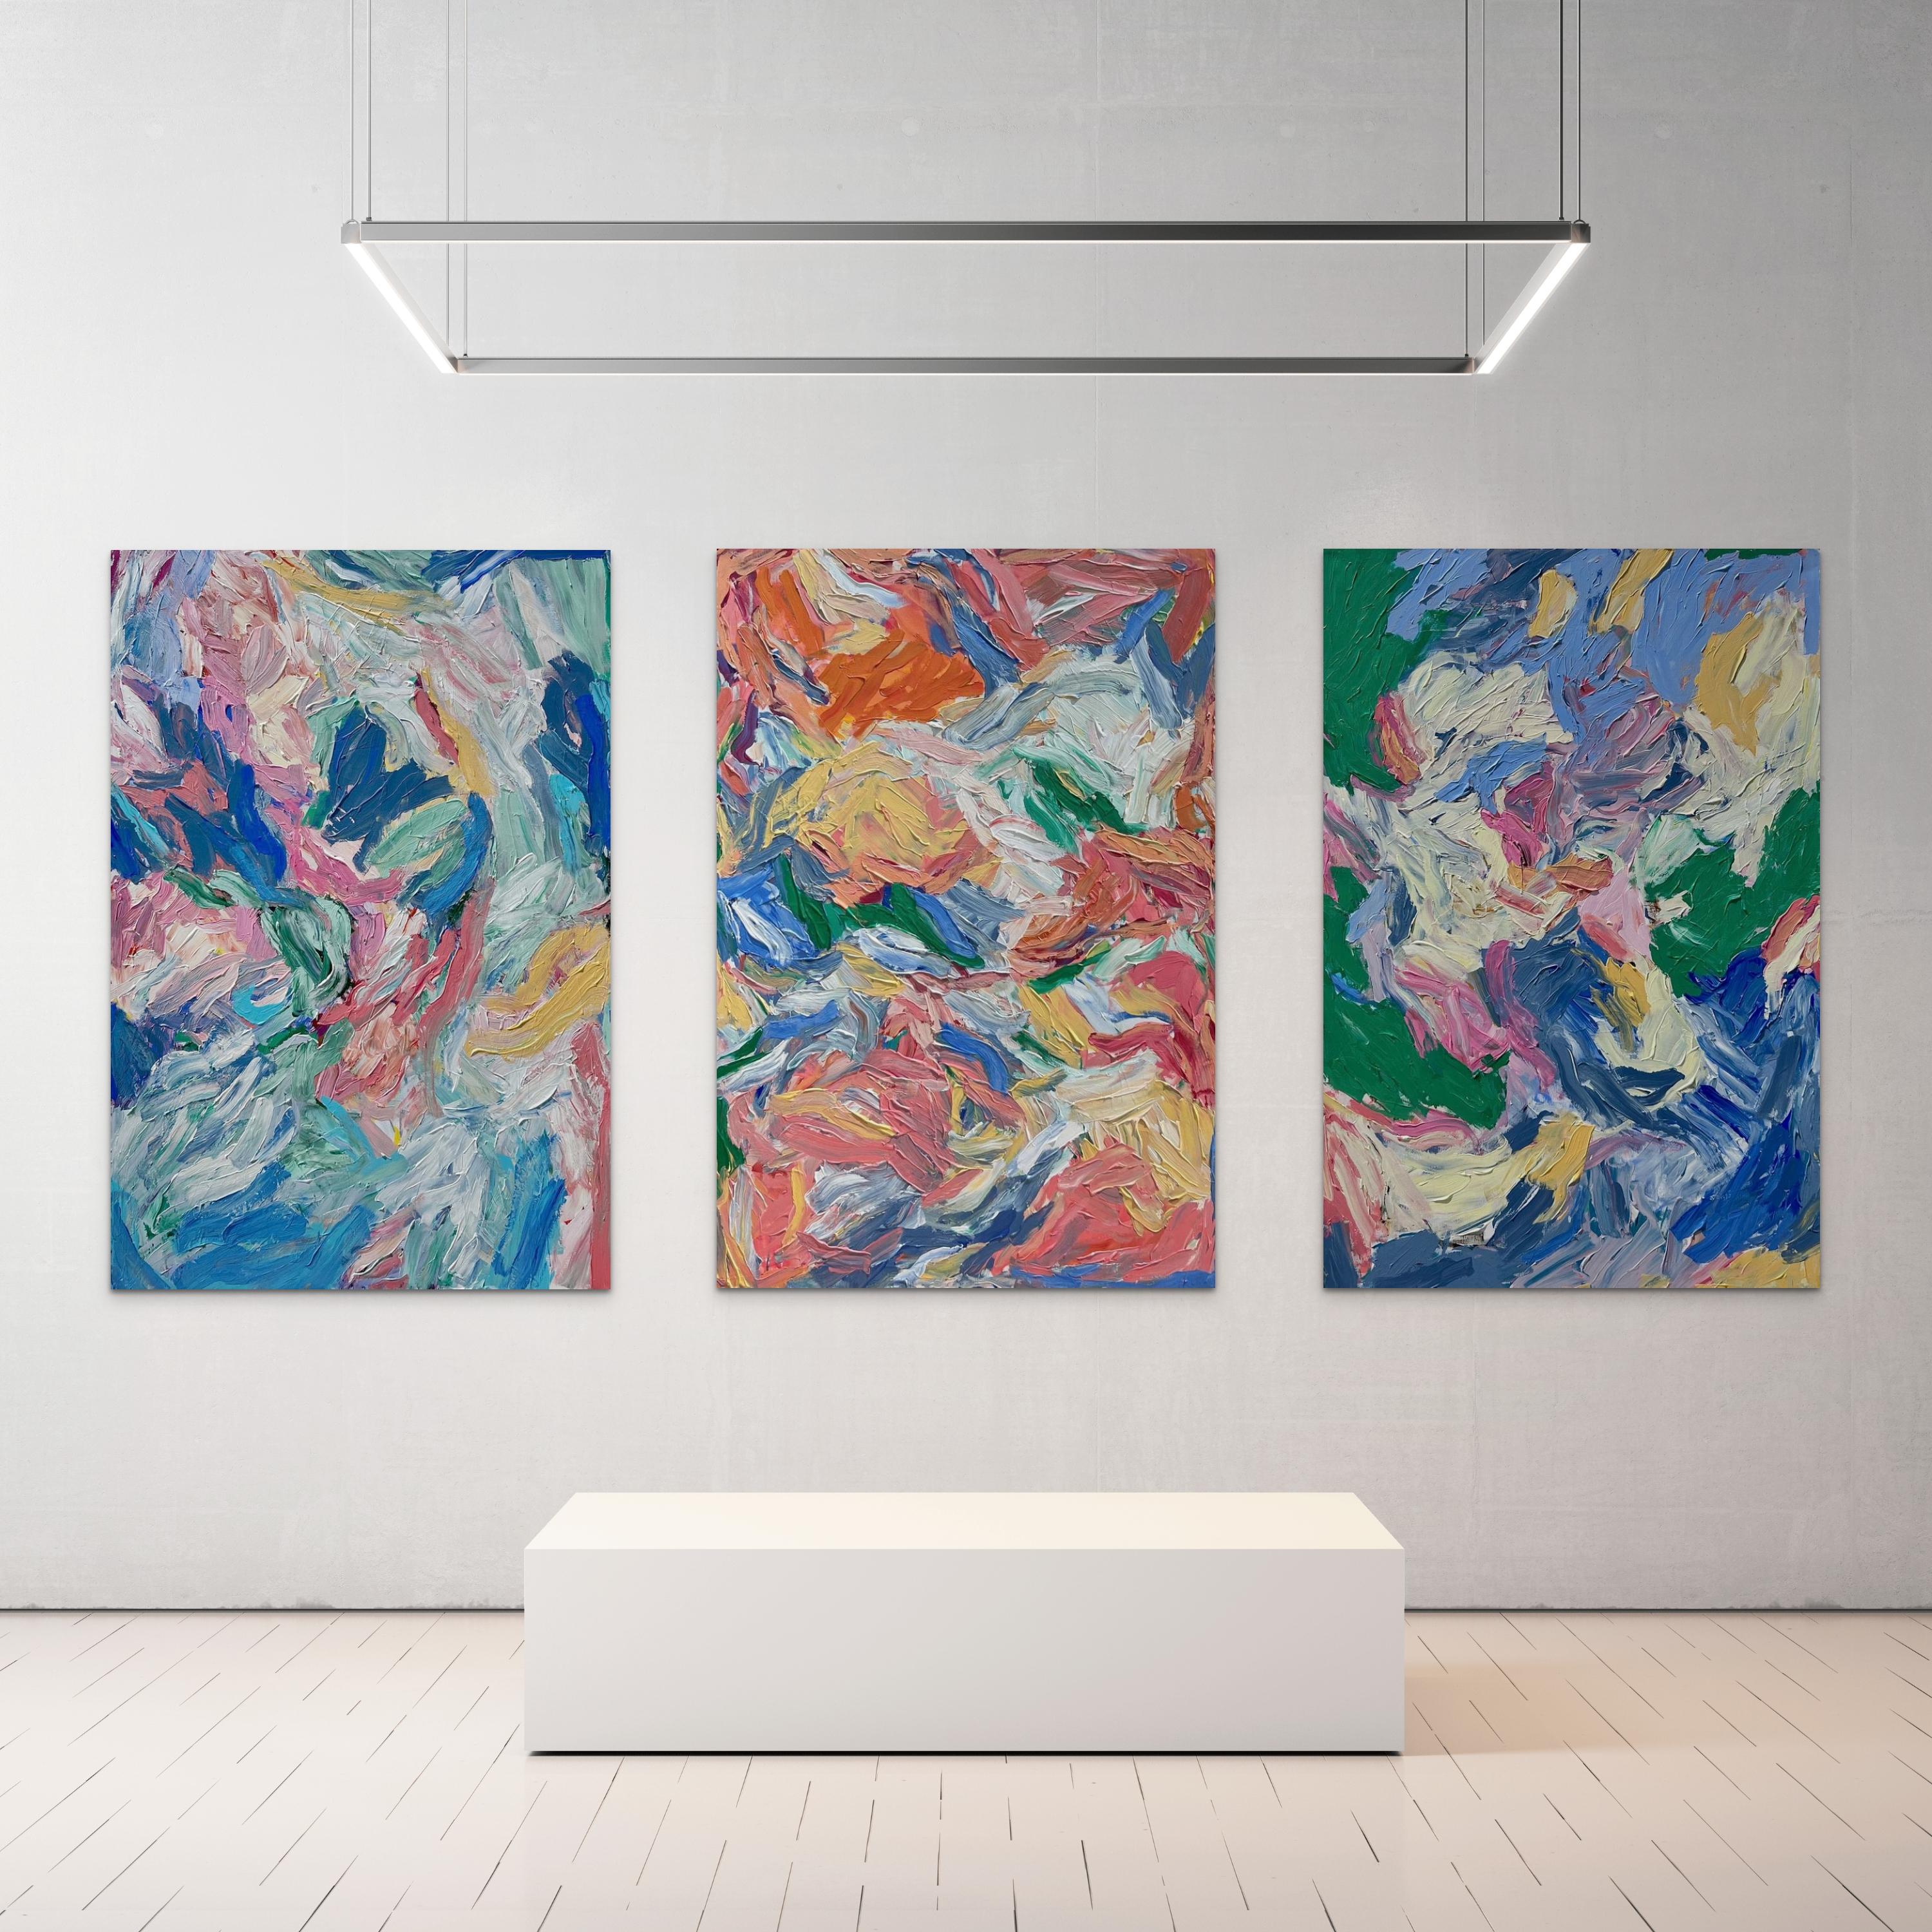 Eliz Gündüz, a visionary artist born in Antalya in 2001, is a rising star in the world of abstract expressionism. Her artistic journey is an enchanting exploration of the intricate interplay between forms, lines, and a mesmerizing array of colors,